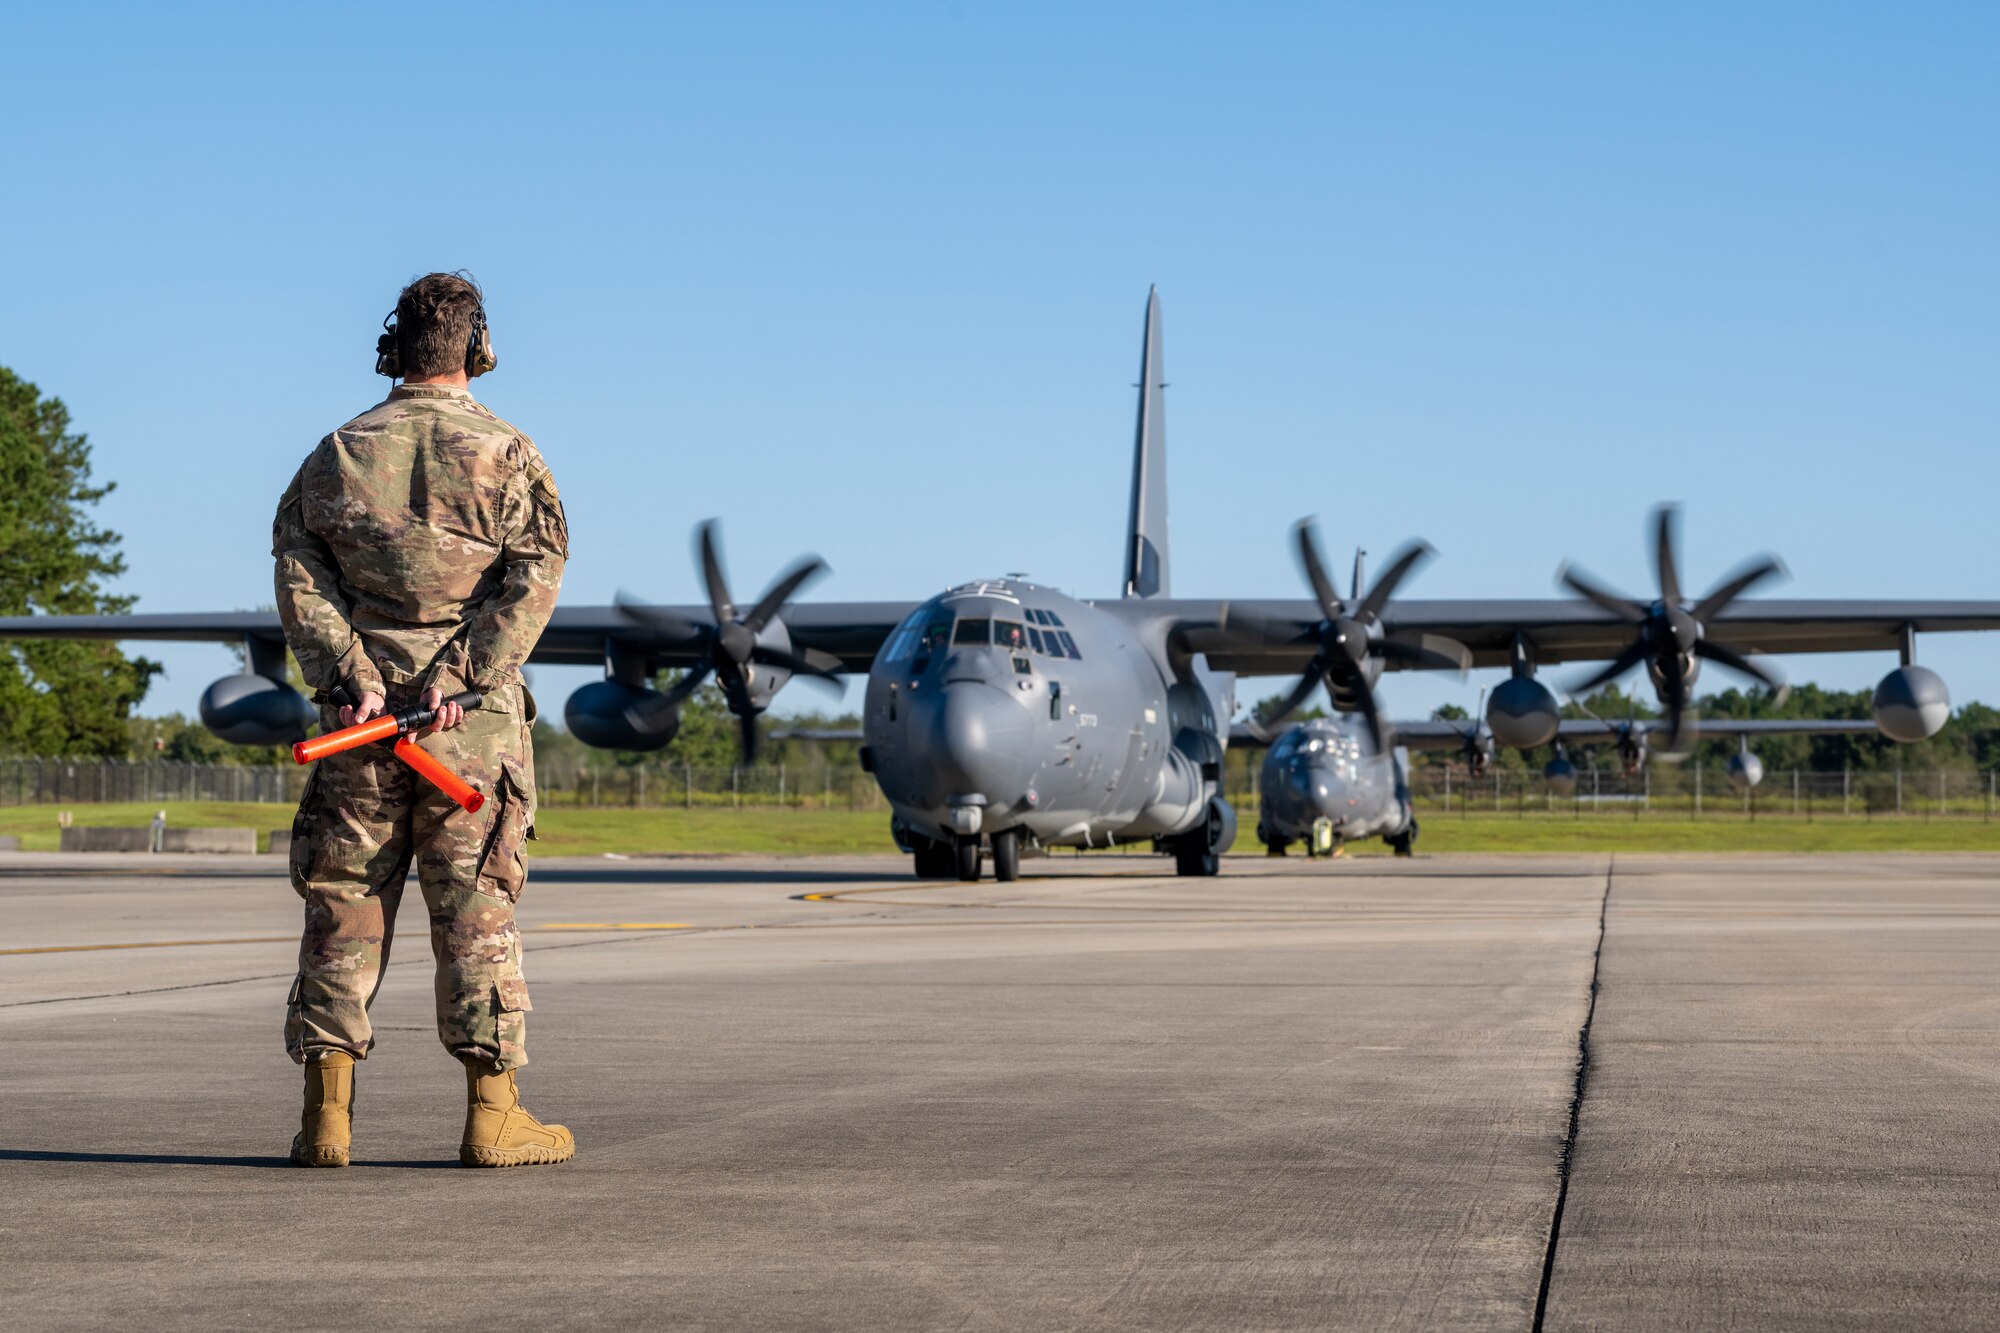 An Airman prepares to marshal an aircraft to the runway.